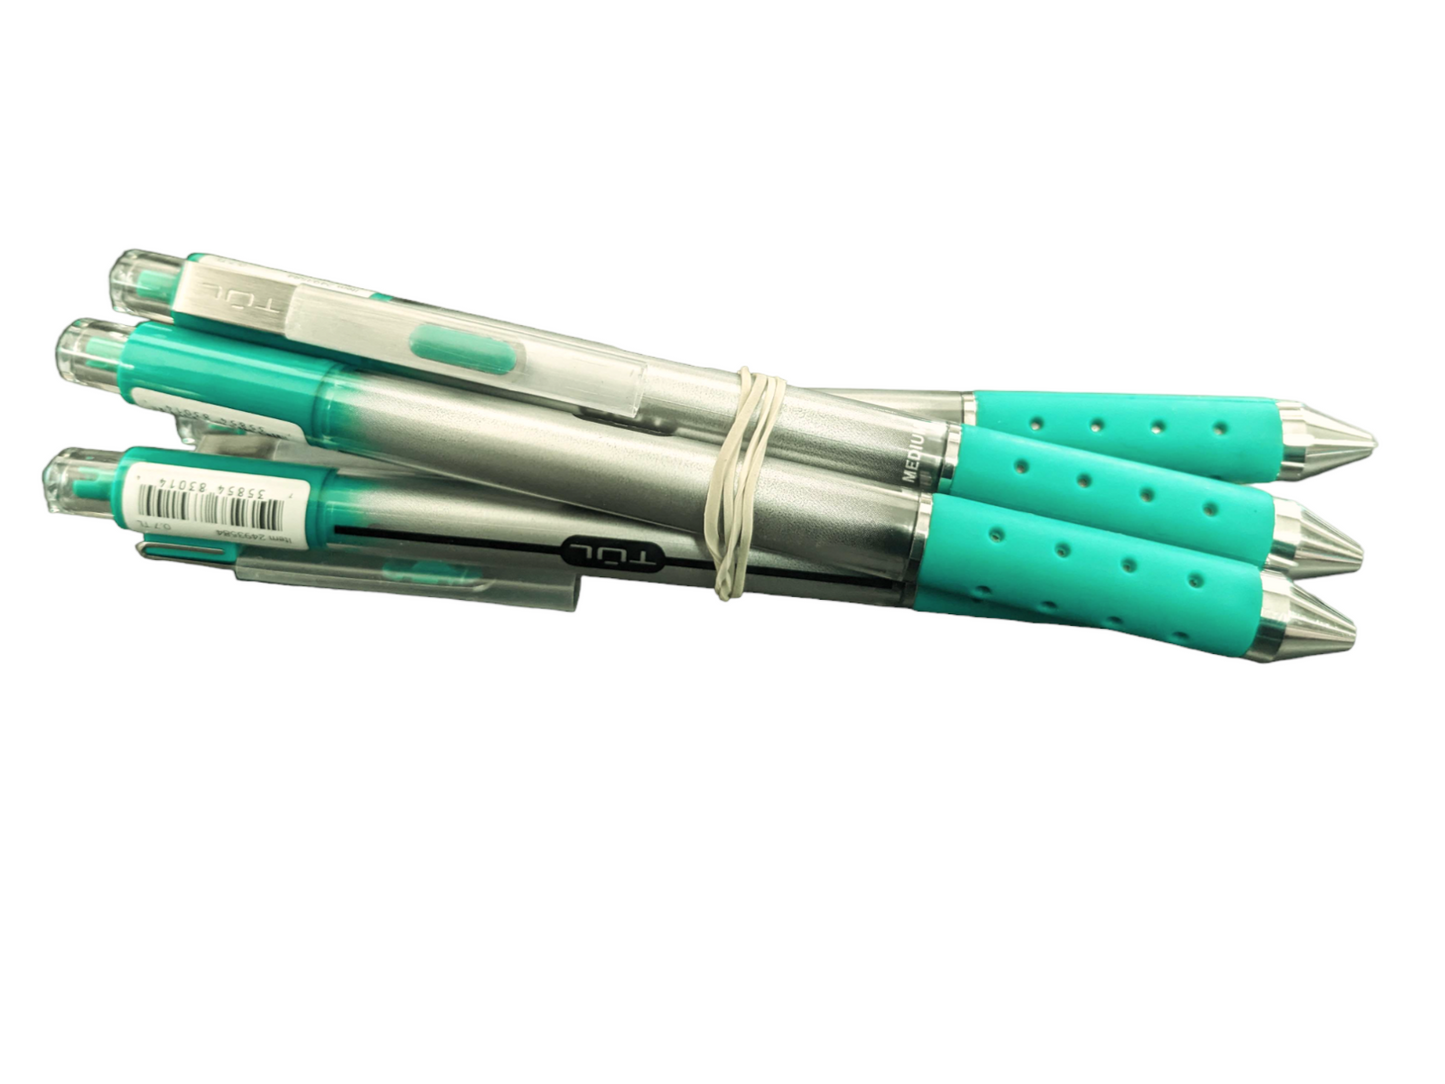 5x Lot of TUL Retractable-Med Point, 0.7- TEAL Blue pen-NEW